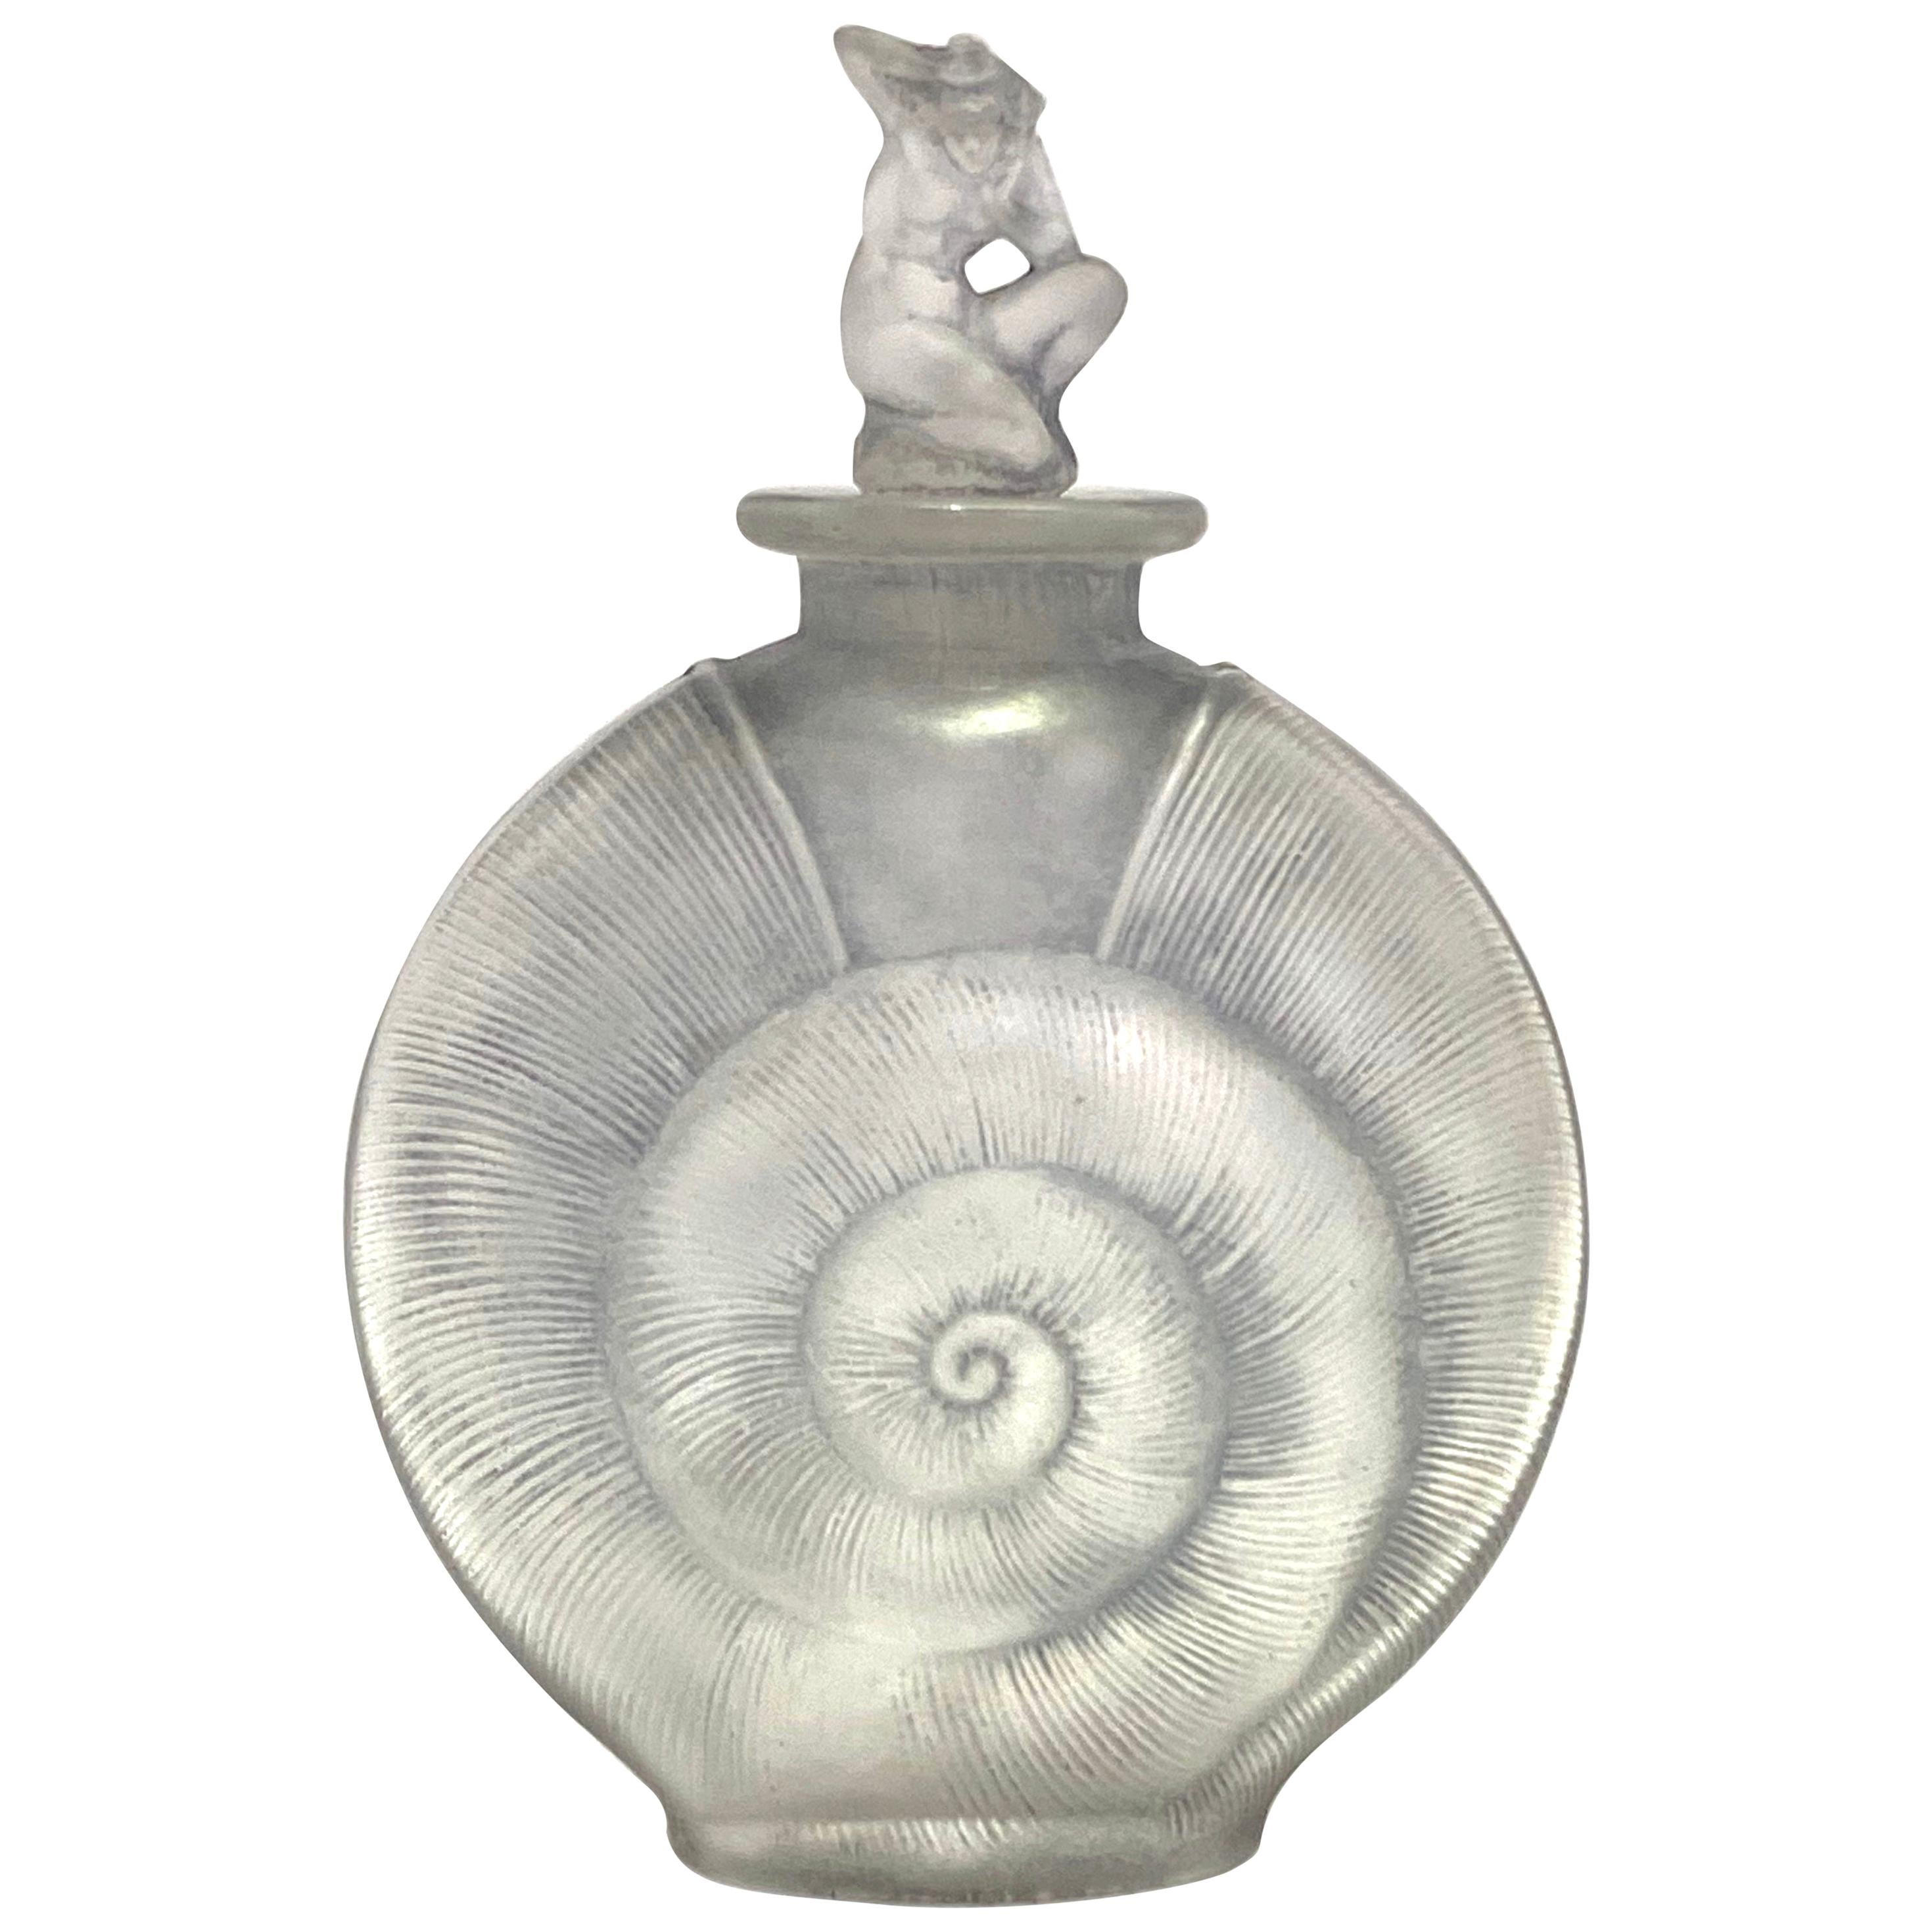 1920 Rene Lalique Amphitrite Perfume Bottle Frosted Glass with Grey Patina